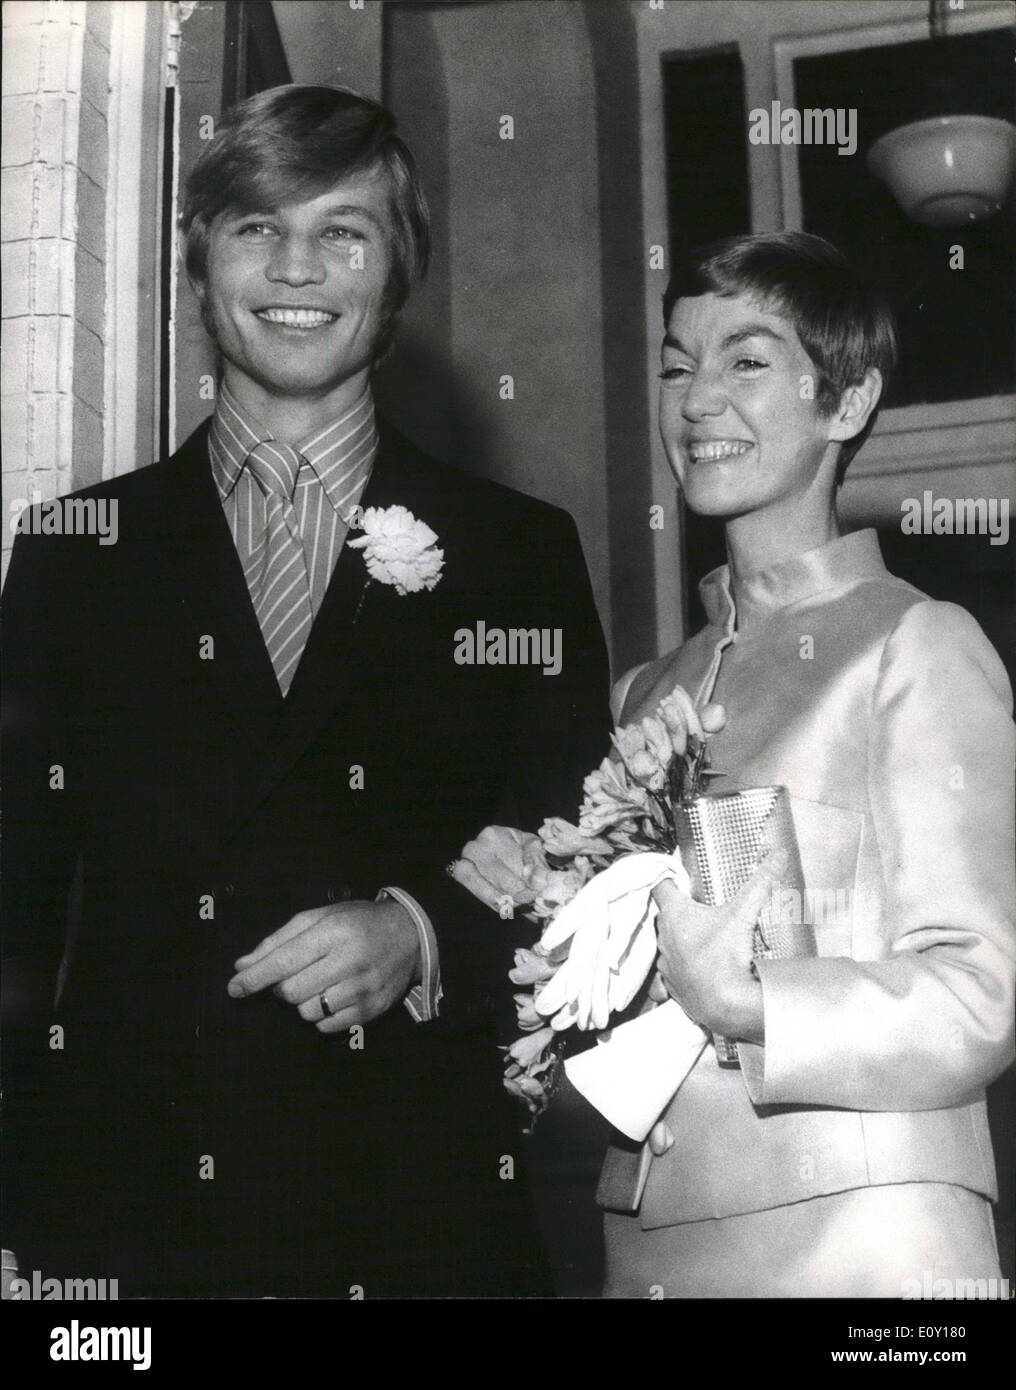 Mar. 03, 1968 - Michael York weds.: British actor, Michael York, who is 26 today married American photographer, Patricia McCallum 26 at Kensington Register Office this morning. Photo shows the bride and groom after the ceremony. Stock Photo